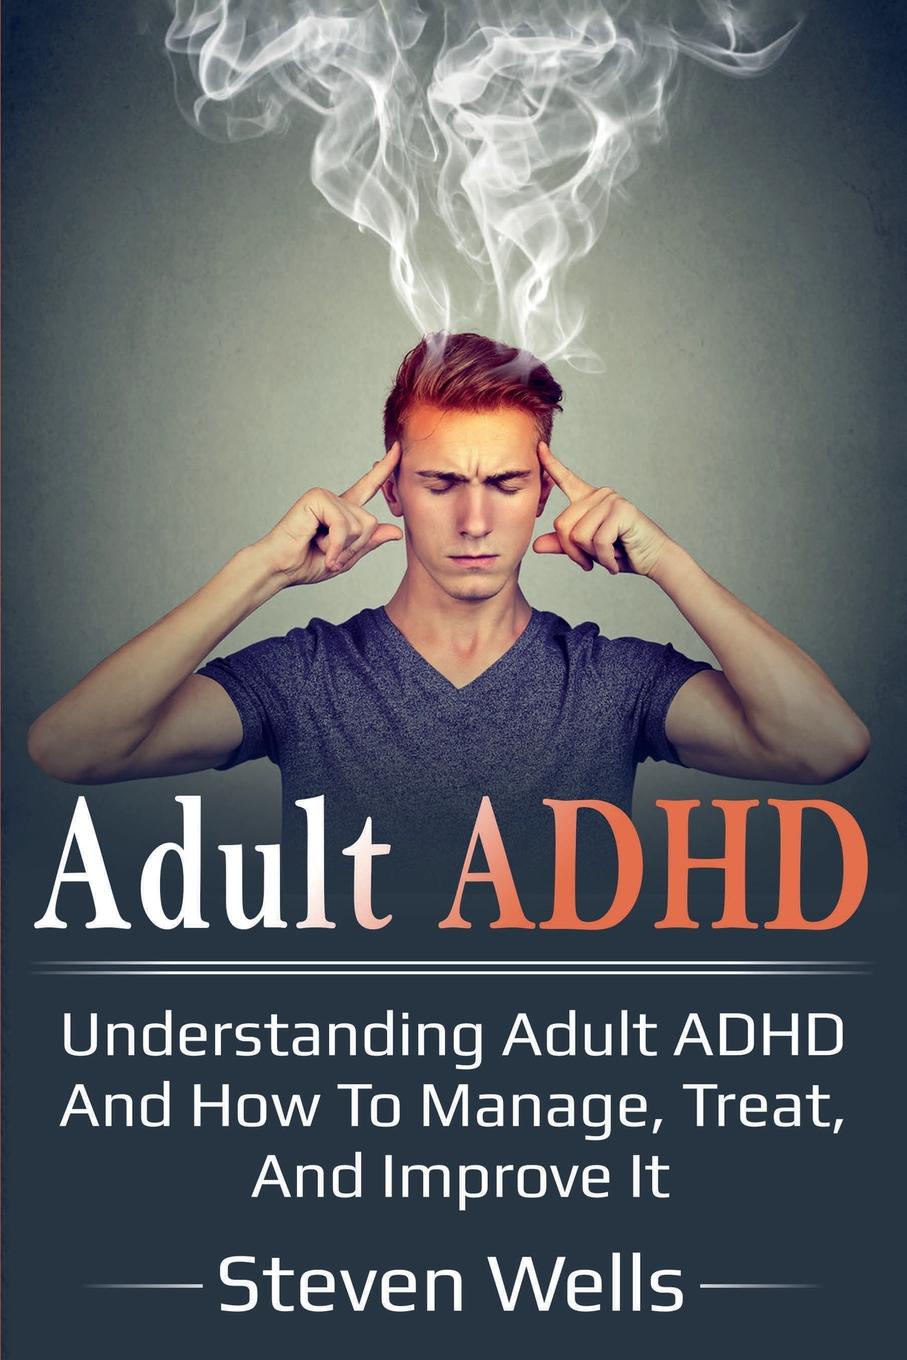 Adult ADHD. Understanding adult ADHD and how to manage, treat, and improve it